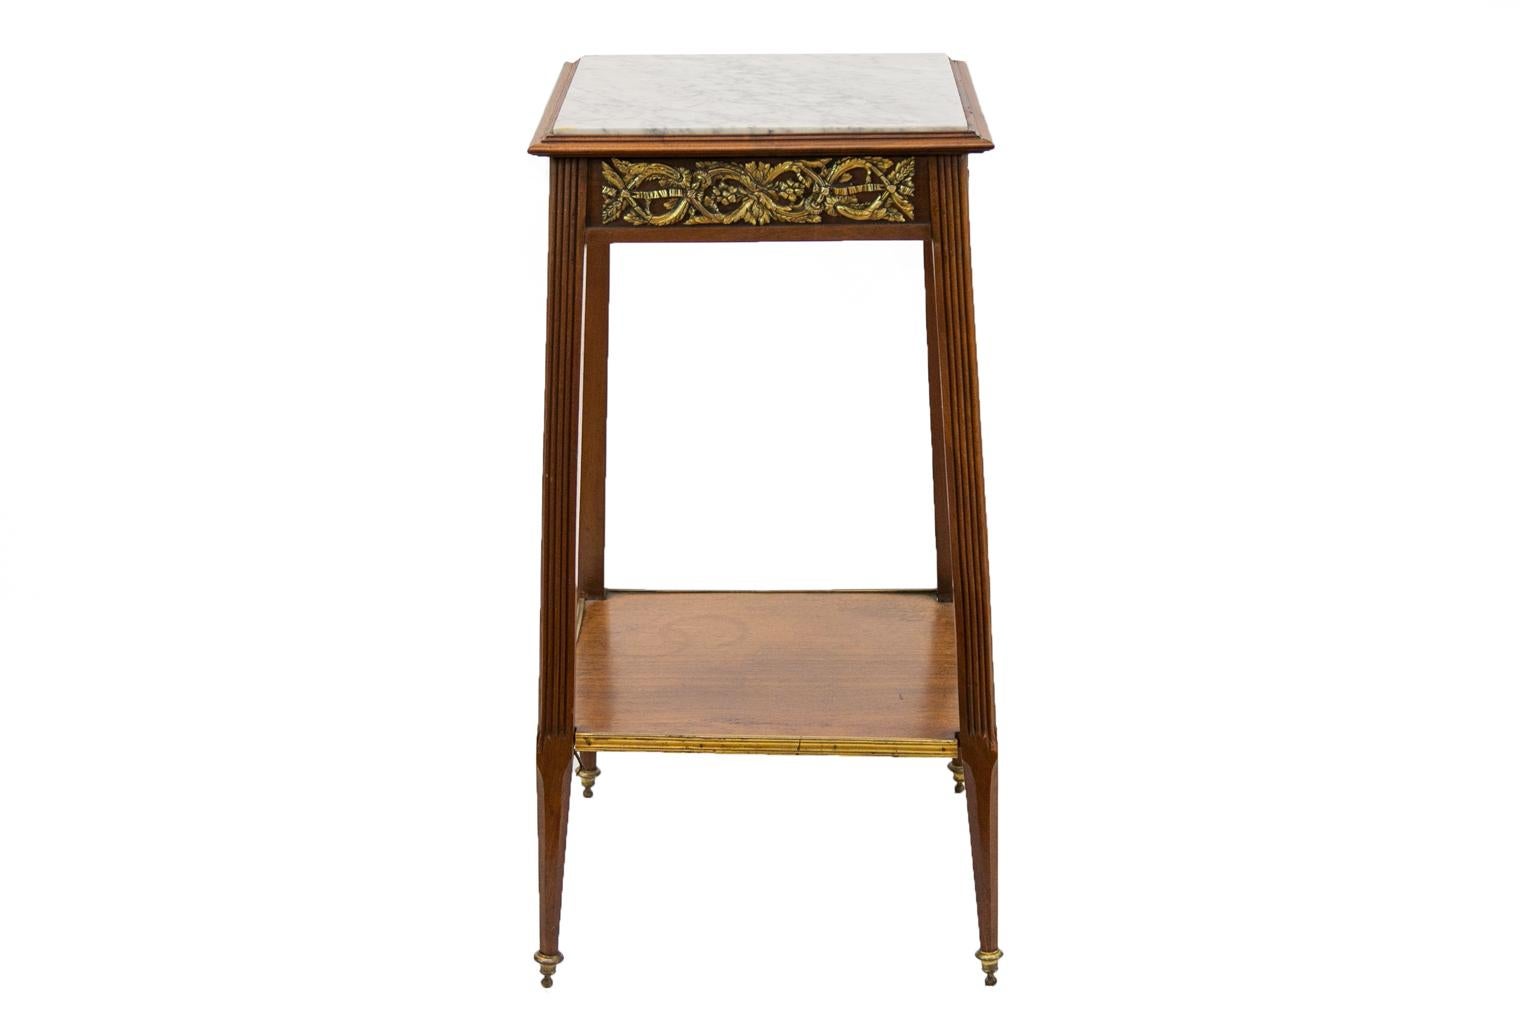 Early 20th Century English Marble-Top Double Tiered Stand For Sale